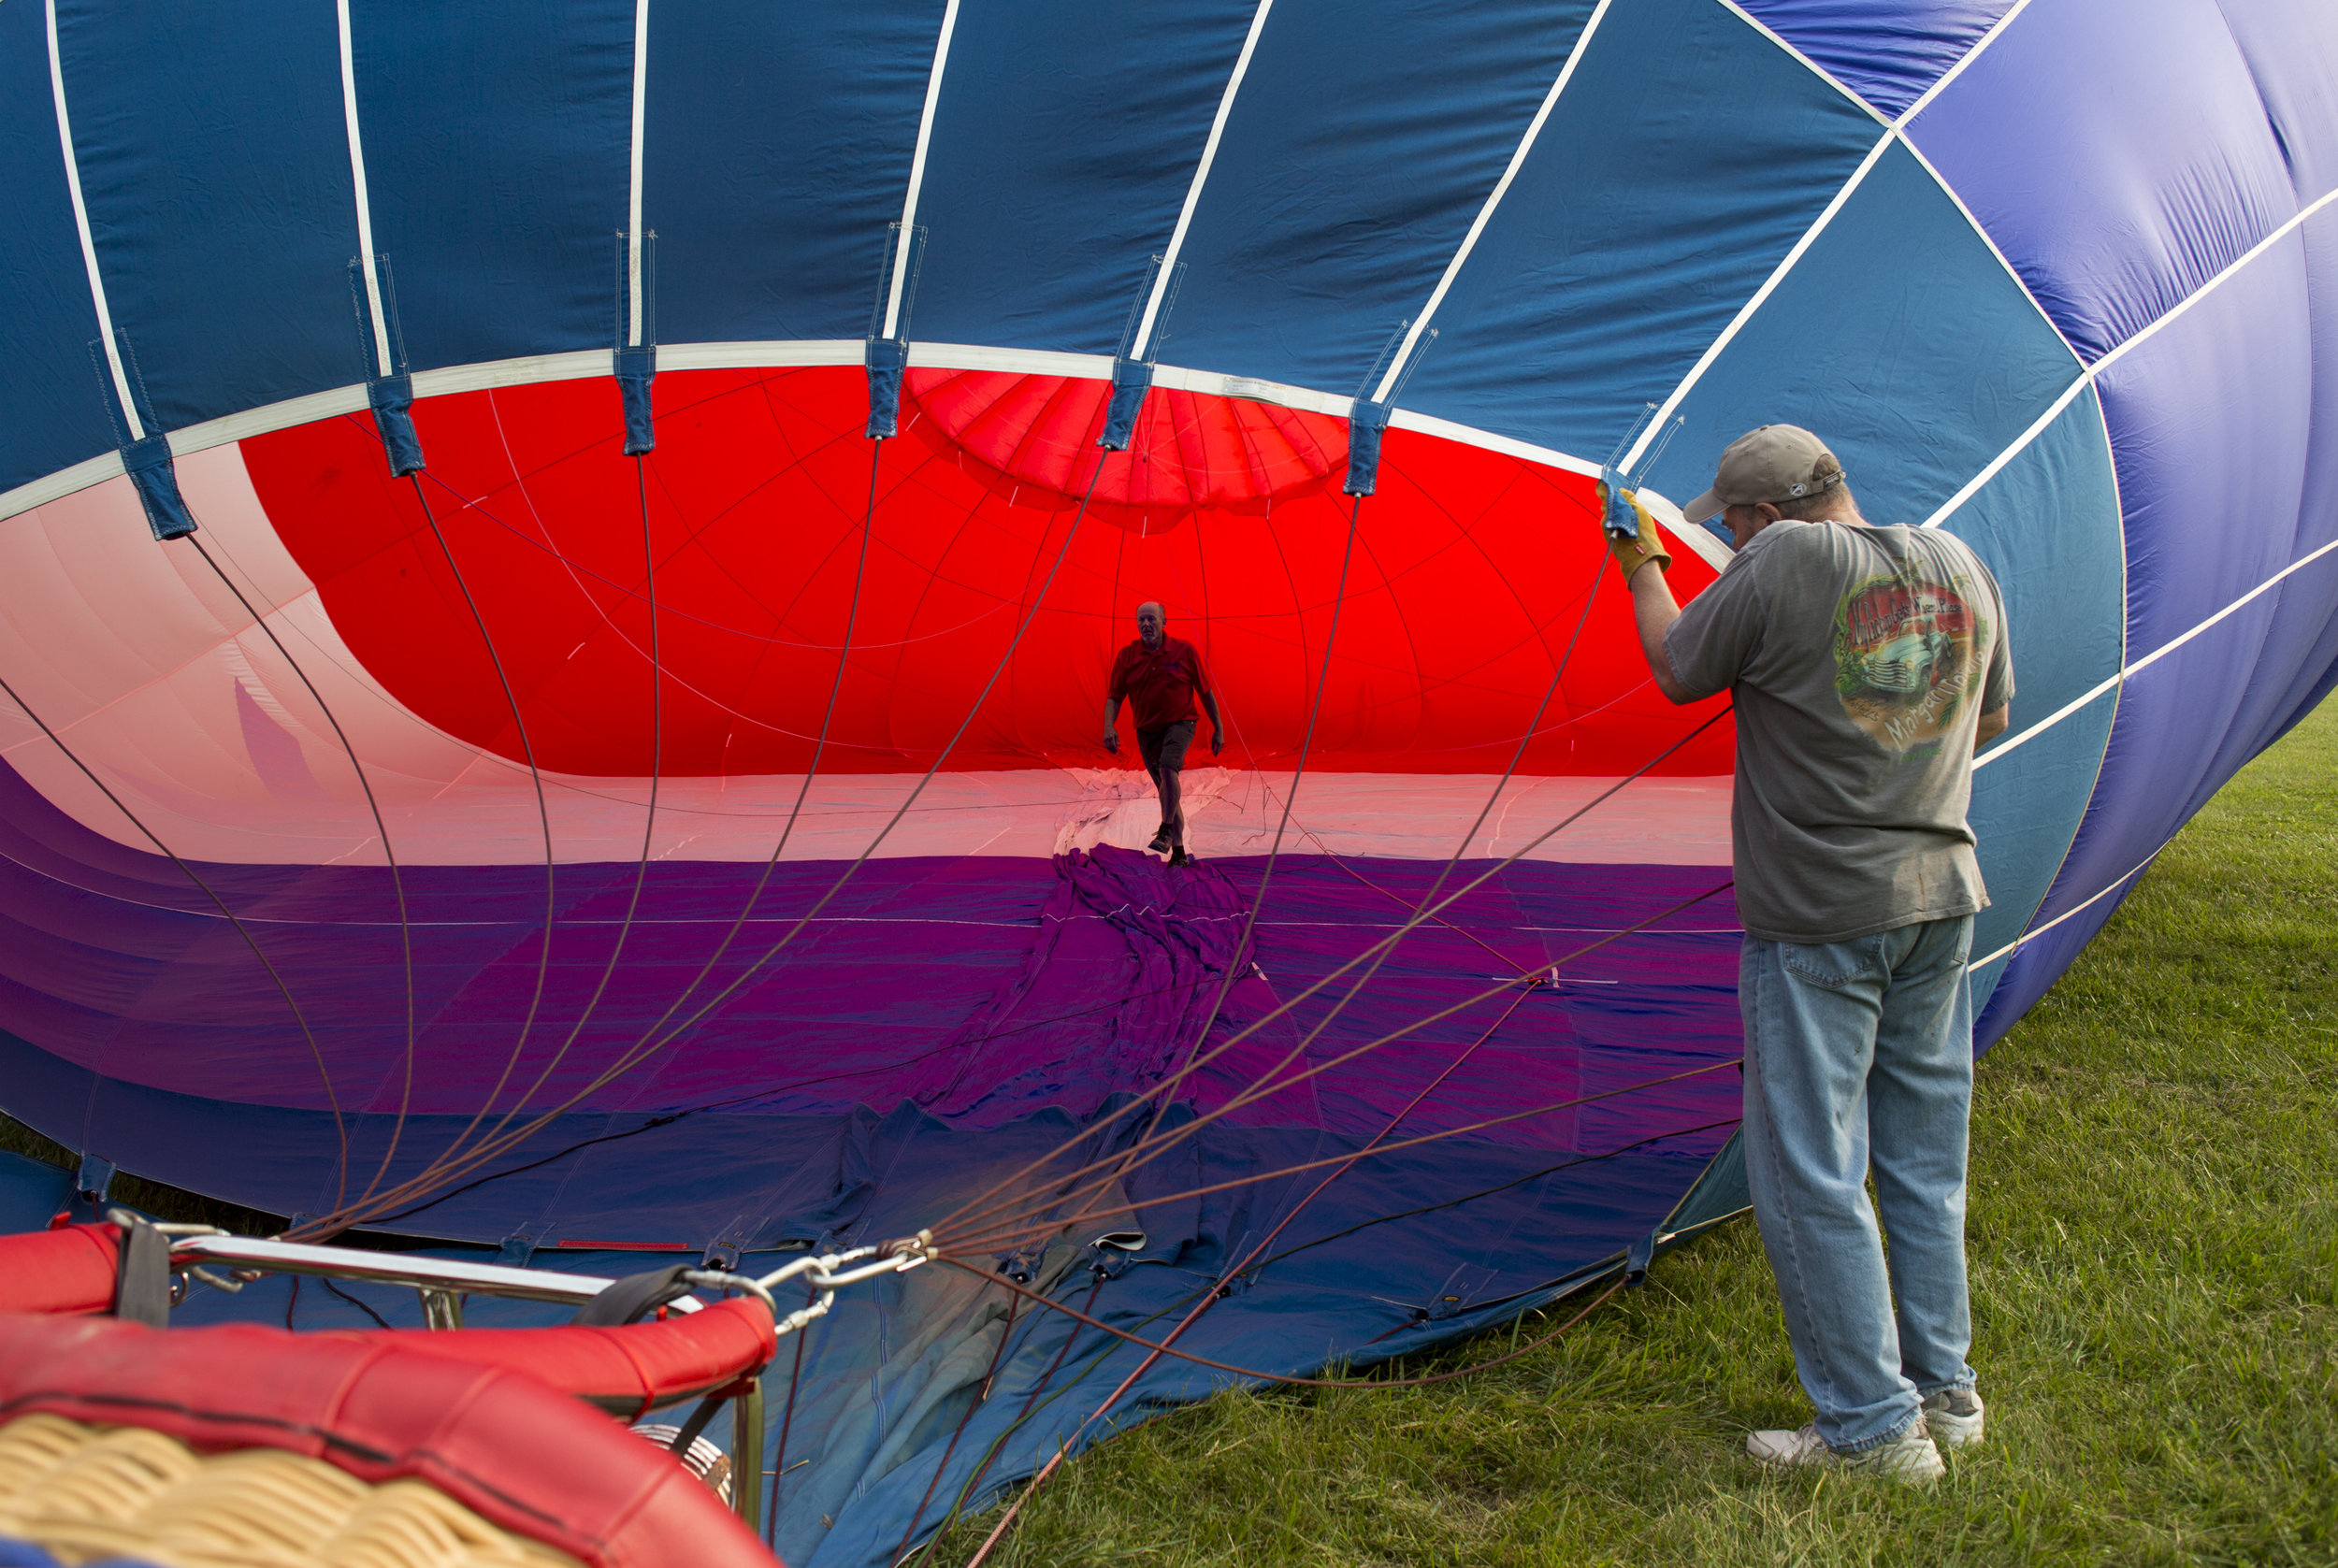  Rick Kohut, a hot air balloon pilot from Columbus, Ohio, walks inside a hot air balloon while Chuck Evans, of Austintown, Ohio, holds it up as it inflates at the Hot Air Balloon Festival at Mastropietro Winery in Berlin Center, Ohio on Sunday, Aug. 